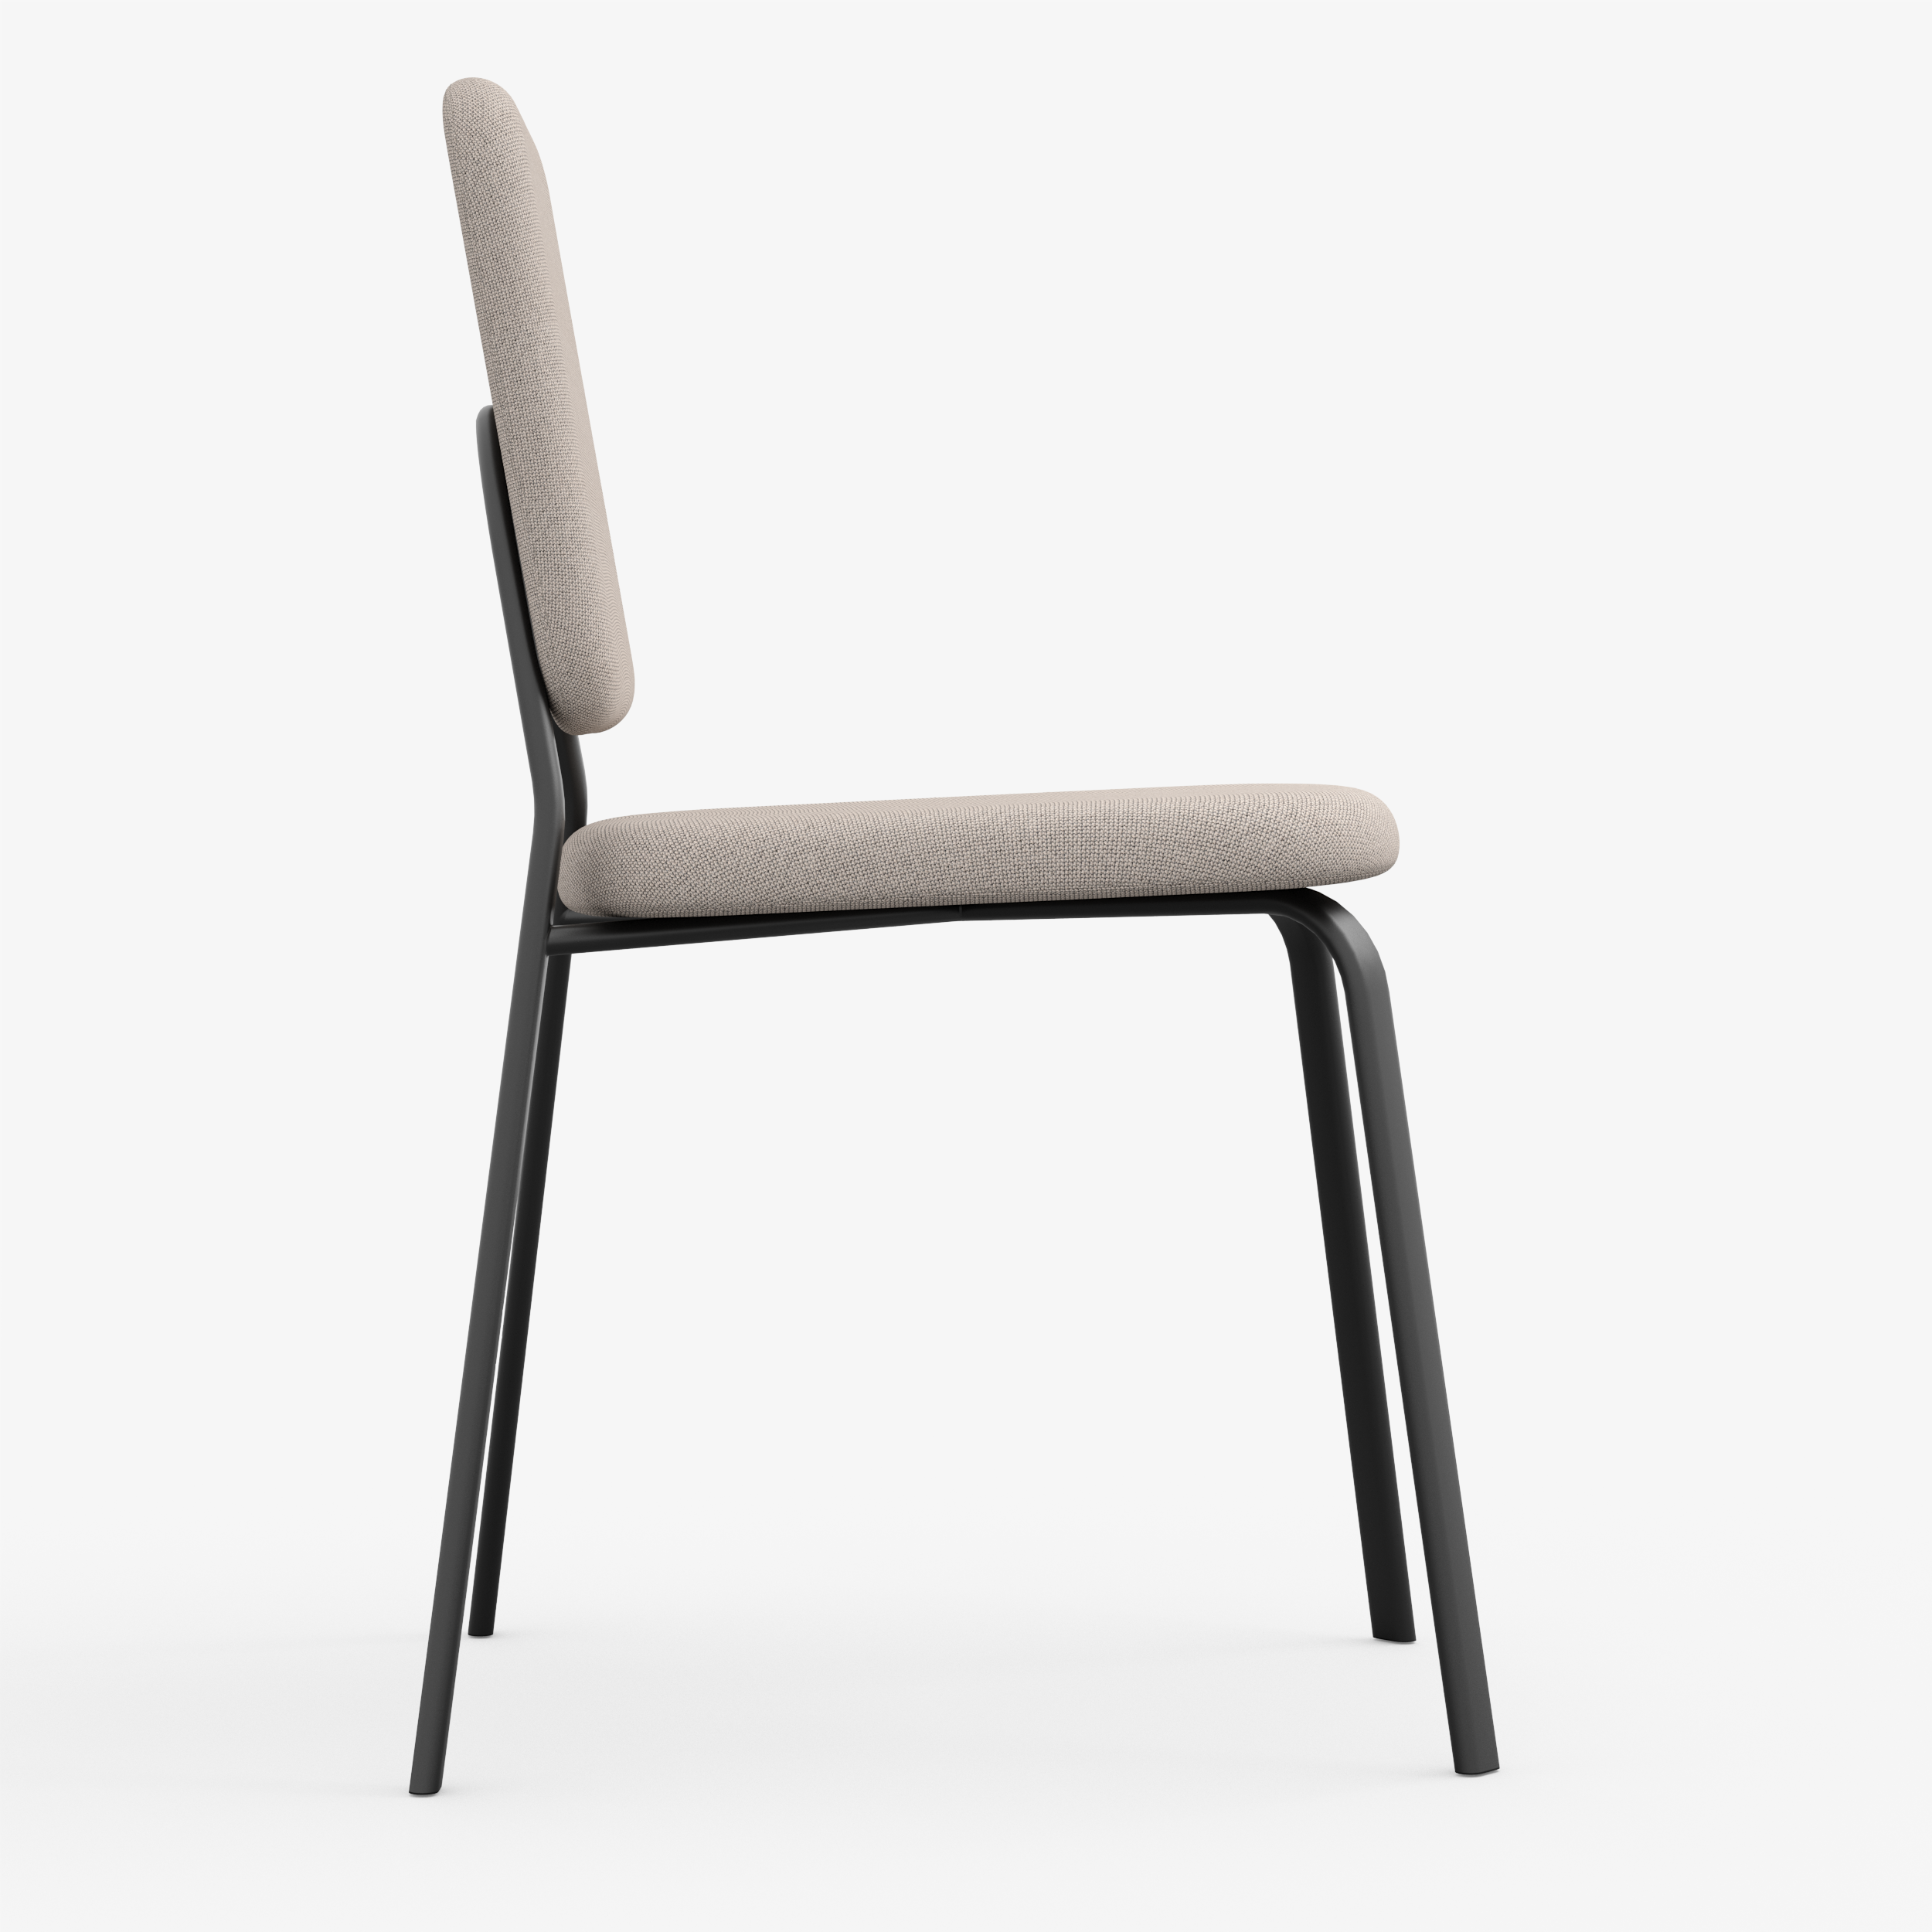 Form - Chair (Square, Beige)